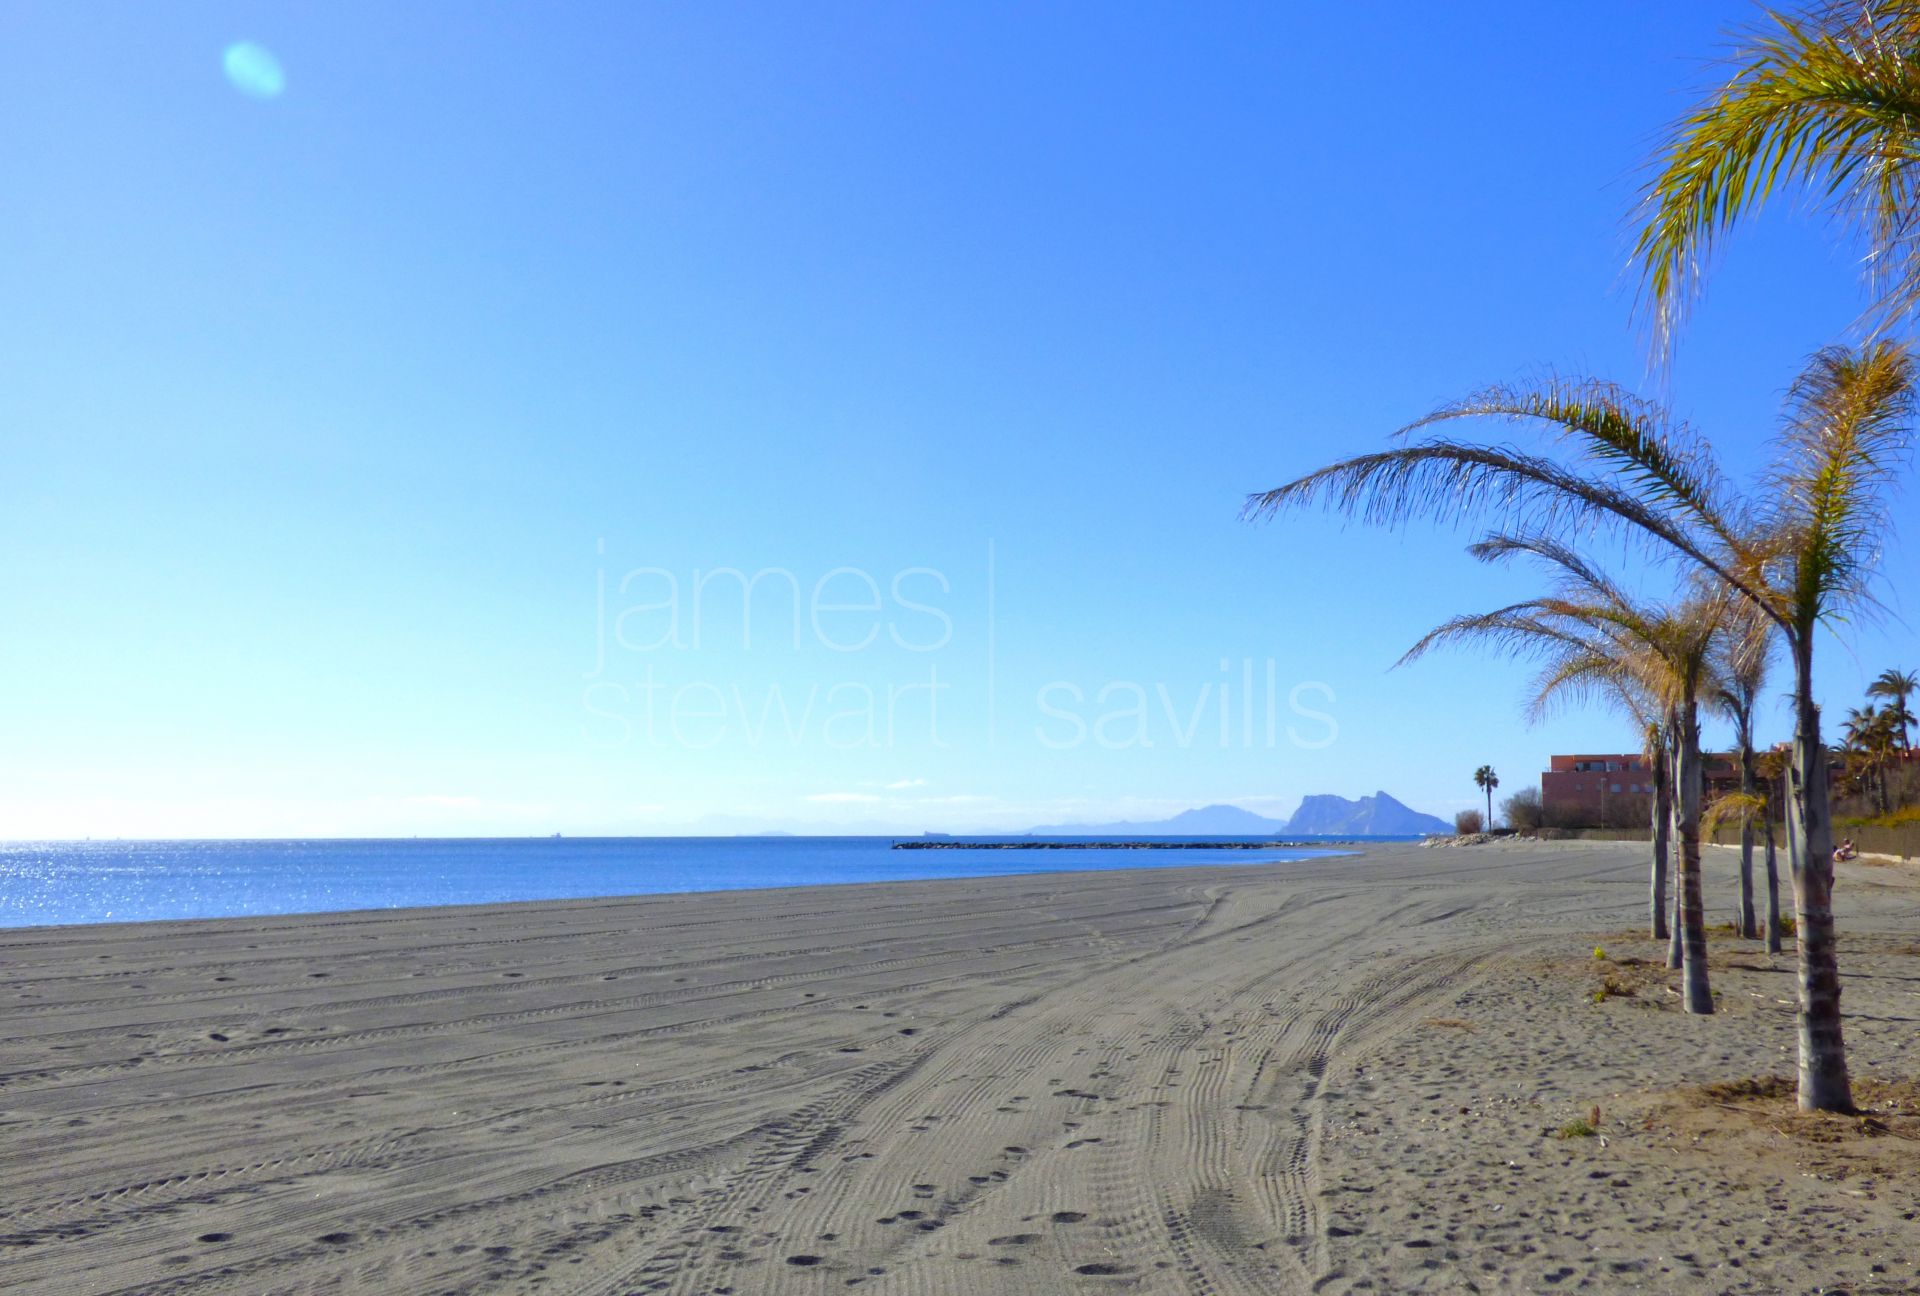 250m2 apartment front line to the sea with stunning views of the Rock of Gibraltar and the African coastline